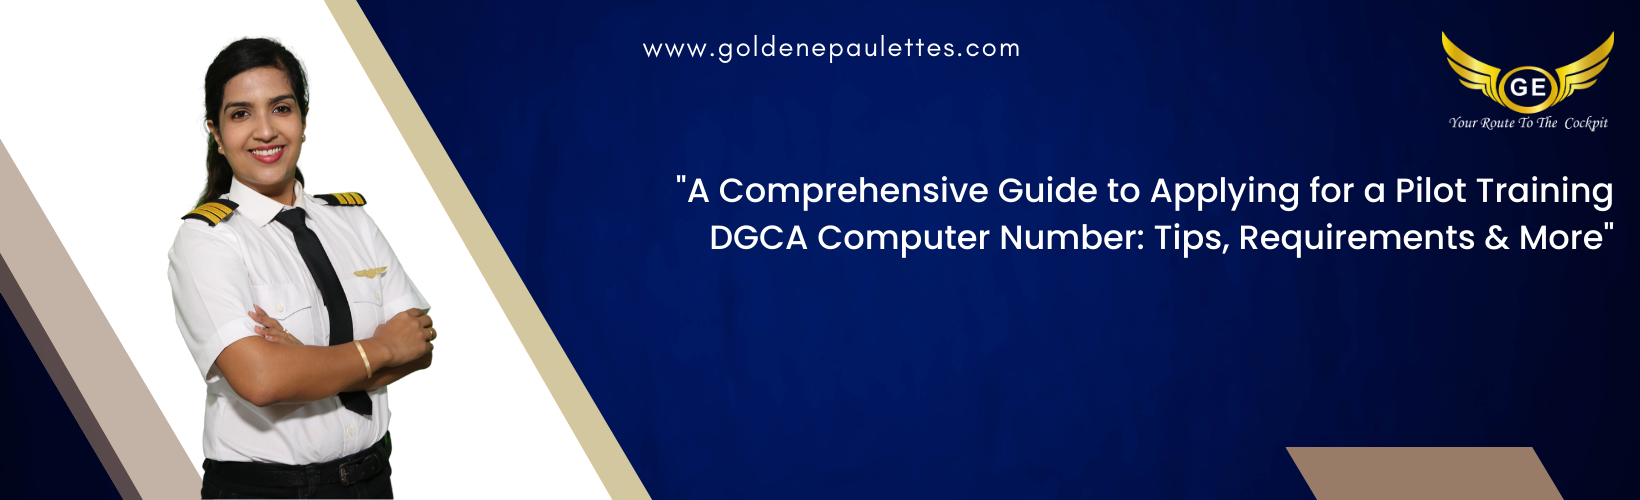 A Guide to Applying for a Pilot Training DGCA Computer Number